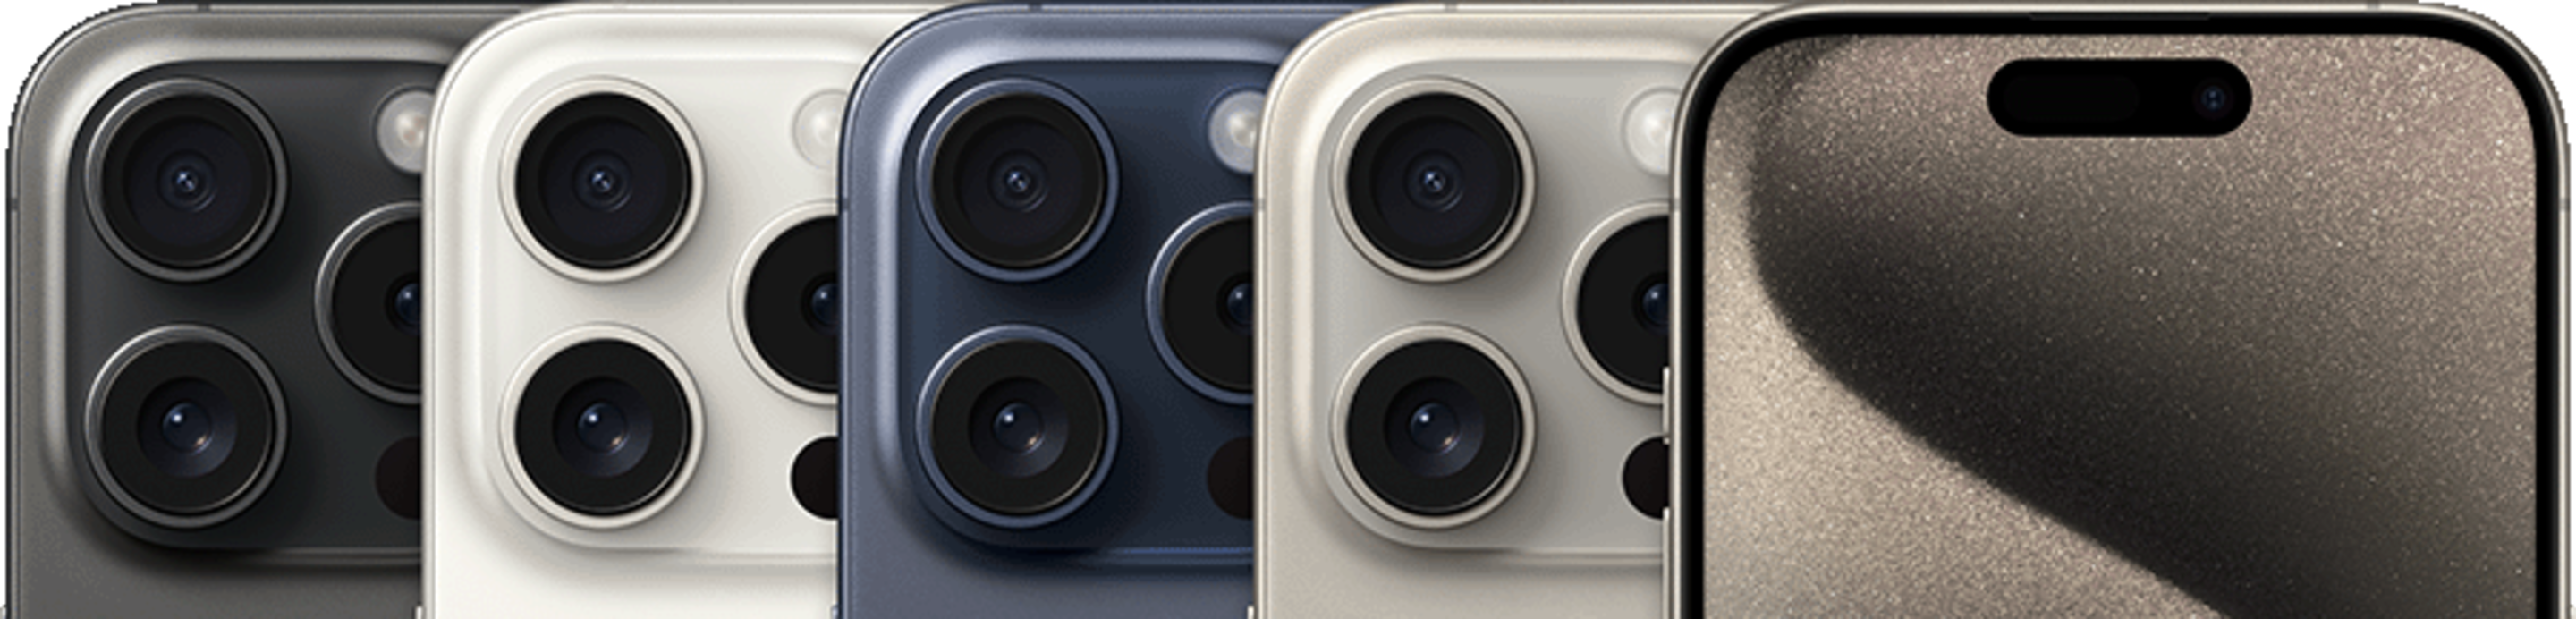 Five iPhone 15 smartphones overlapping - views of camera system from front and rear